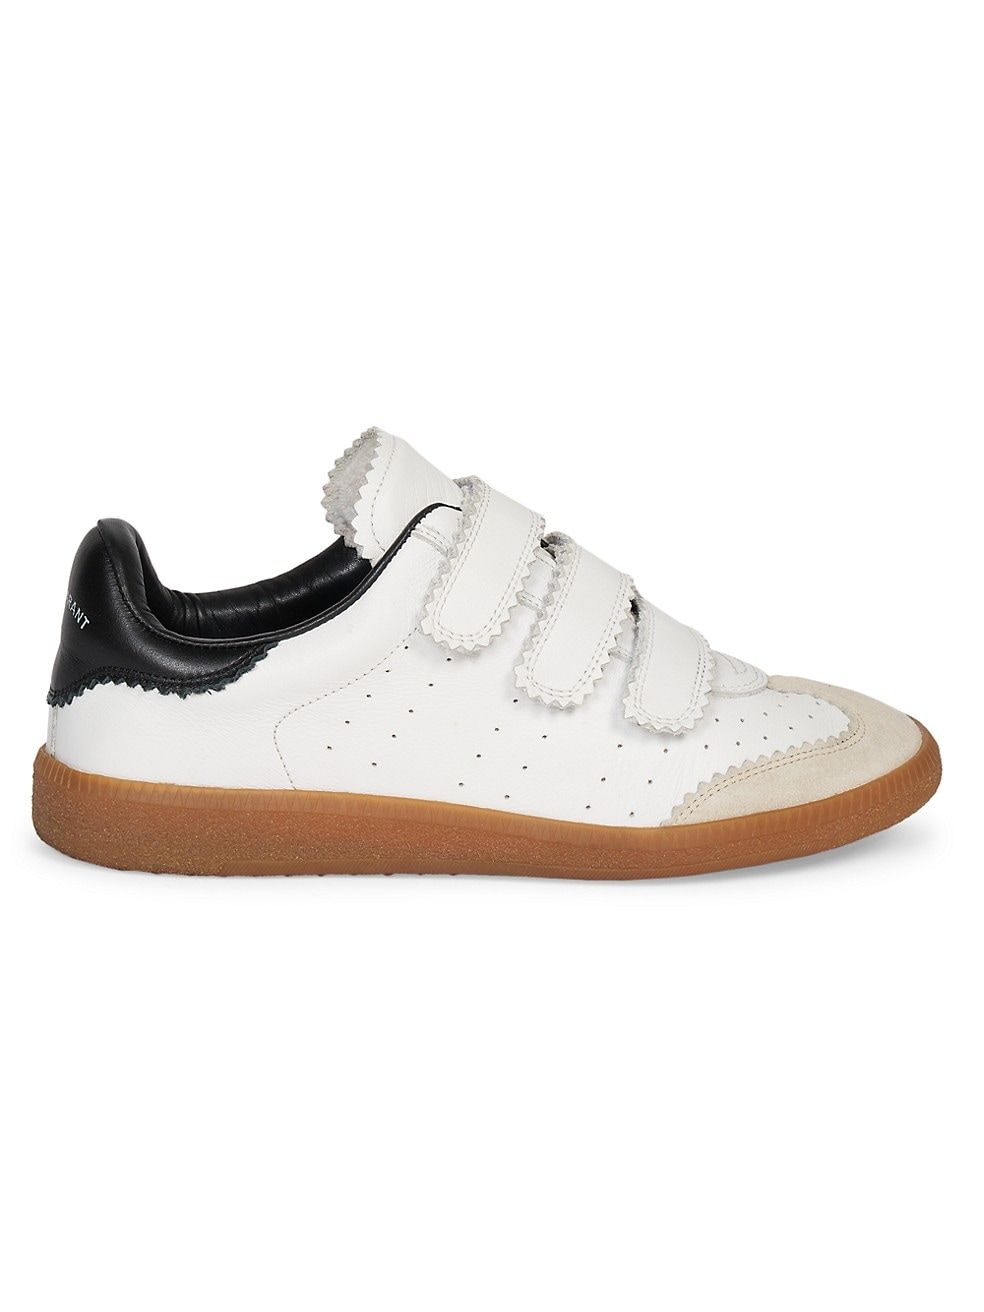 Isabel Marant Beth Velcro Leather Sneakers | Saks Fifth Avenue